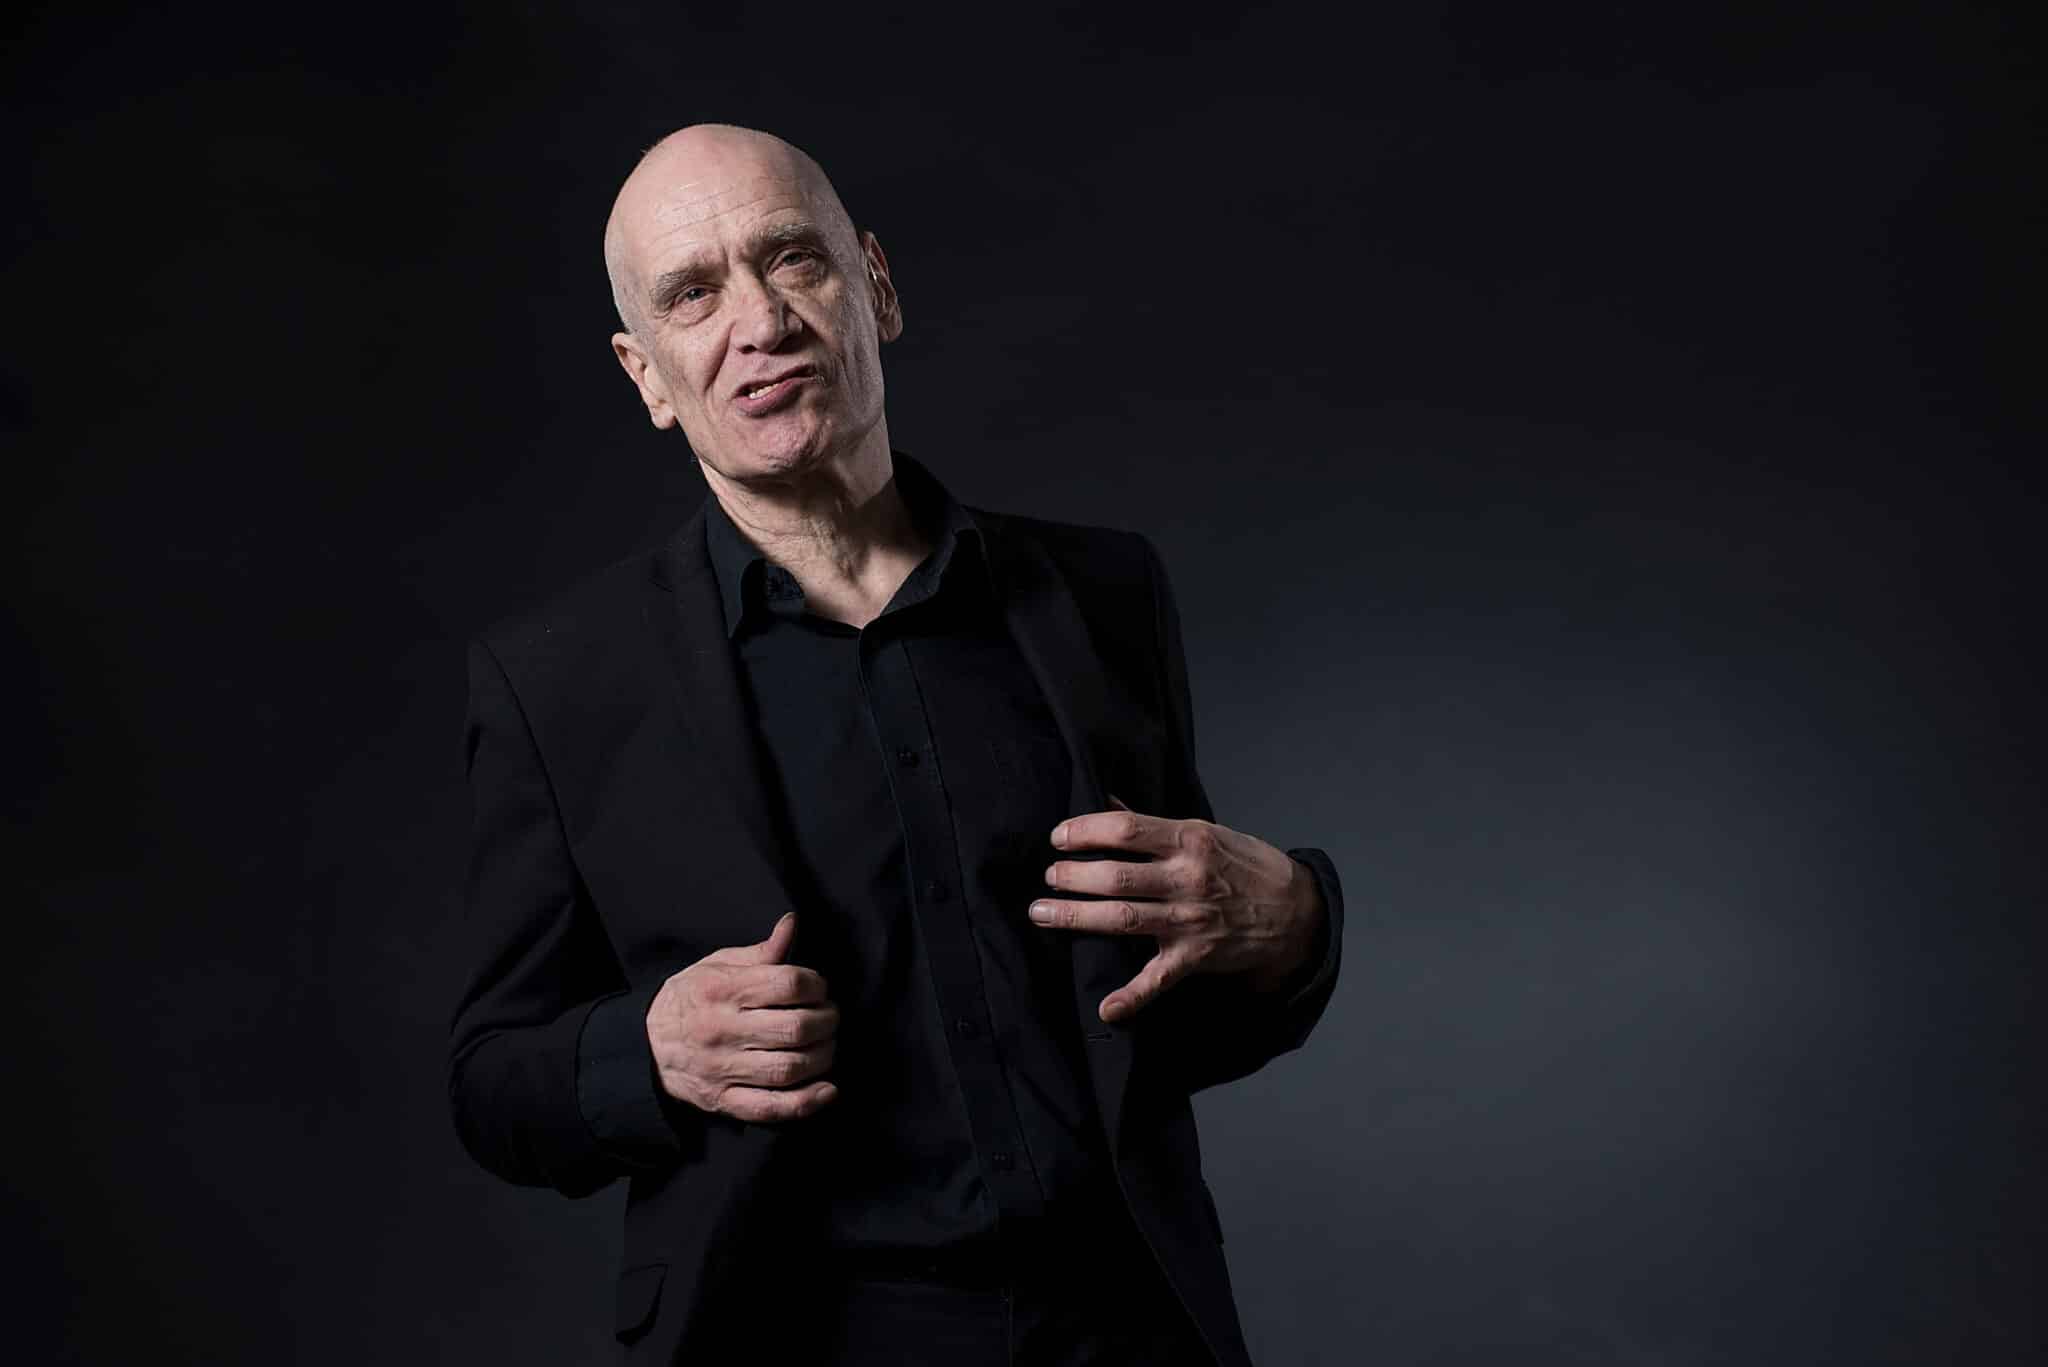 EDINBURGH, SCOTLAND - AUGUST 23:  Wilko Johnson attends the Edinburgh International Book Festival on August 23, 2016 in Edinburgh, Scotland. The Edinburgh International Book Festival is one of the most important annual literary events, and takes place in the city which became a UNESCO City of Literature in 2004.  (Photo by Awakening/Getty Images)